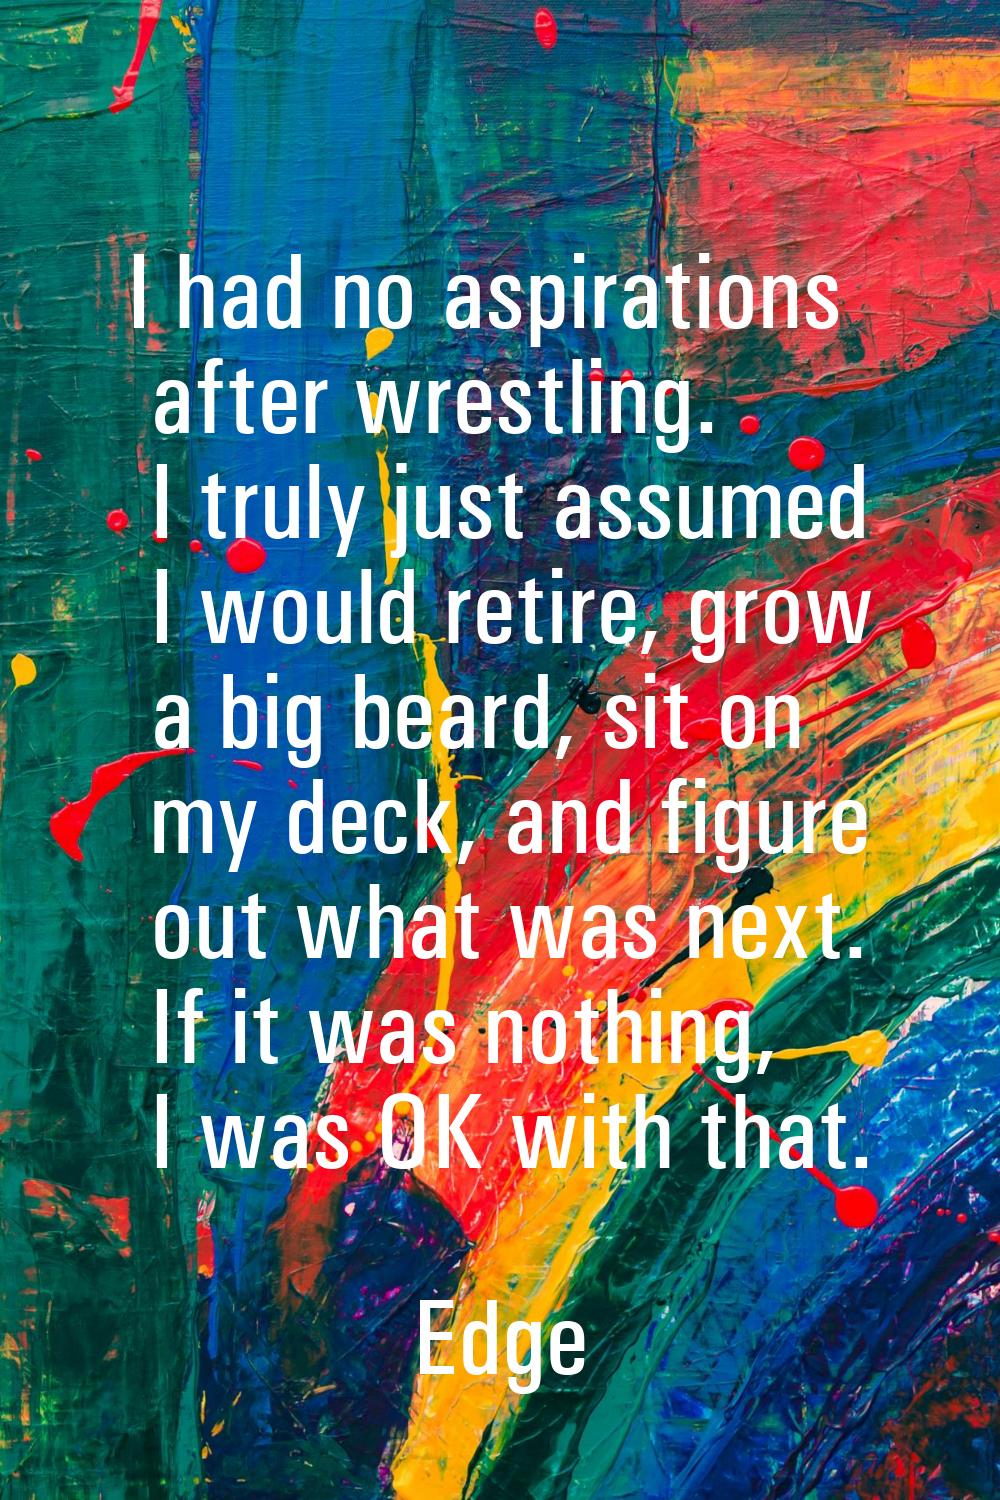 I had no aspirations after wrestling. I truly just assumed I would retire, grow a big beard, sit on